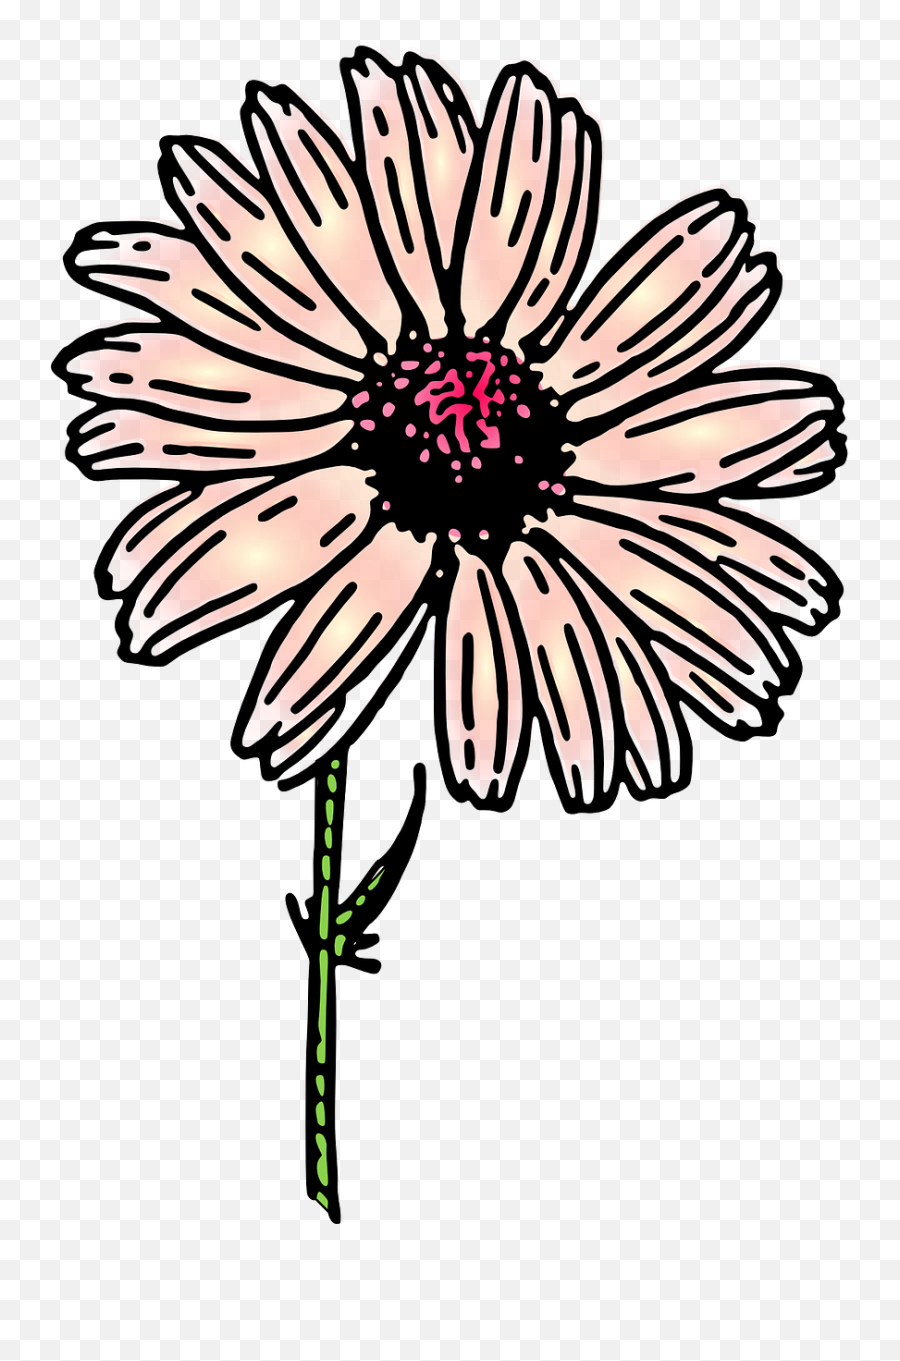 Daisy Flower Nature Plant Png Picpng Emoji,Daisy Flower Png